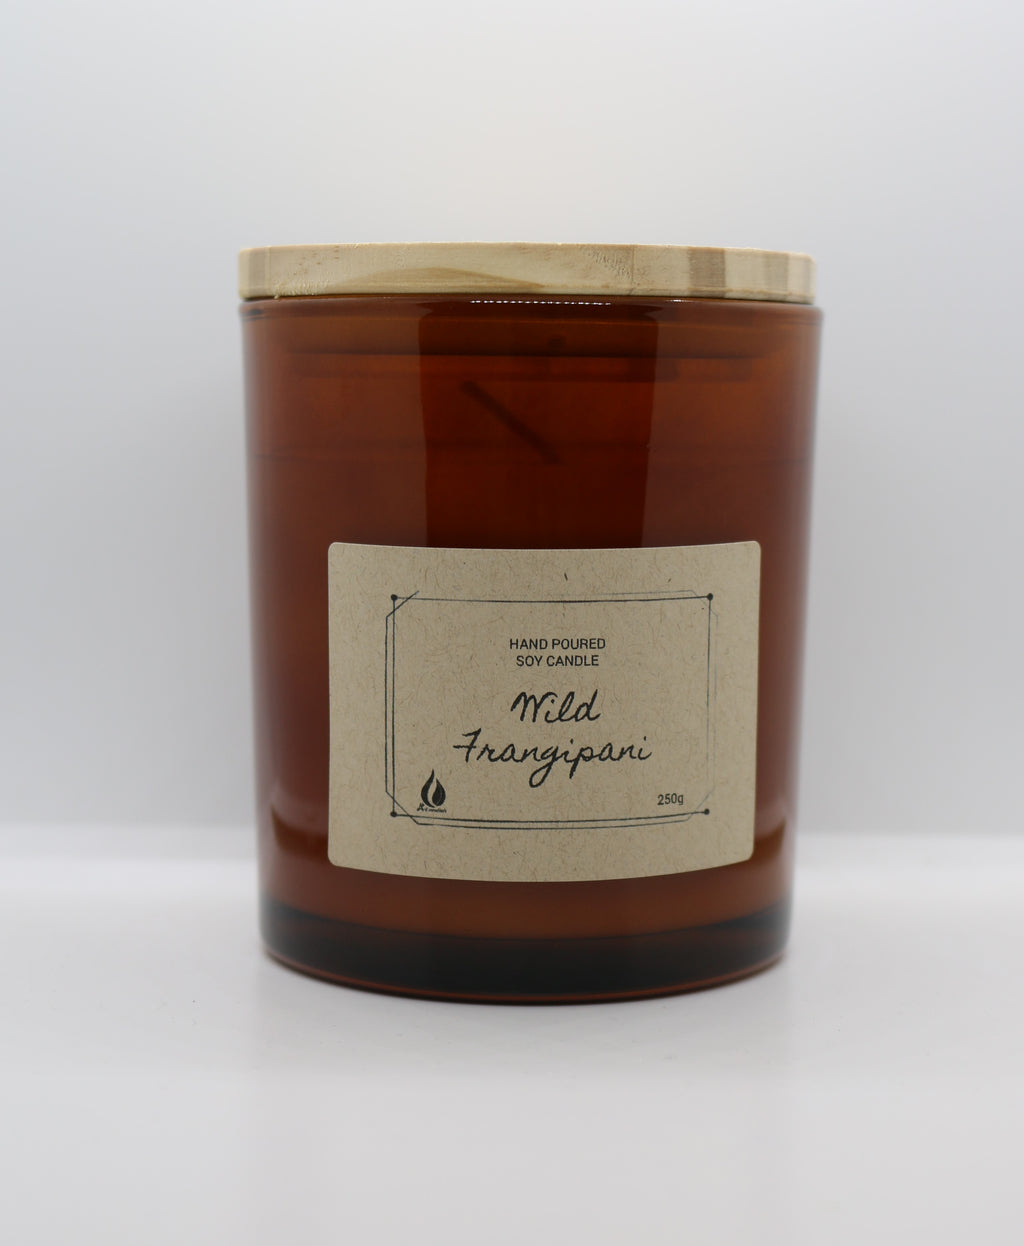 WILD FRANGIPANI - Hand Poured Soy Candle A+ Essentials Pty Ltd